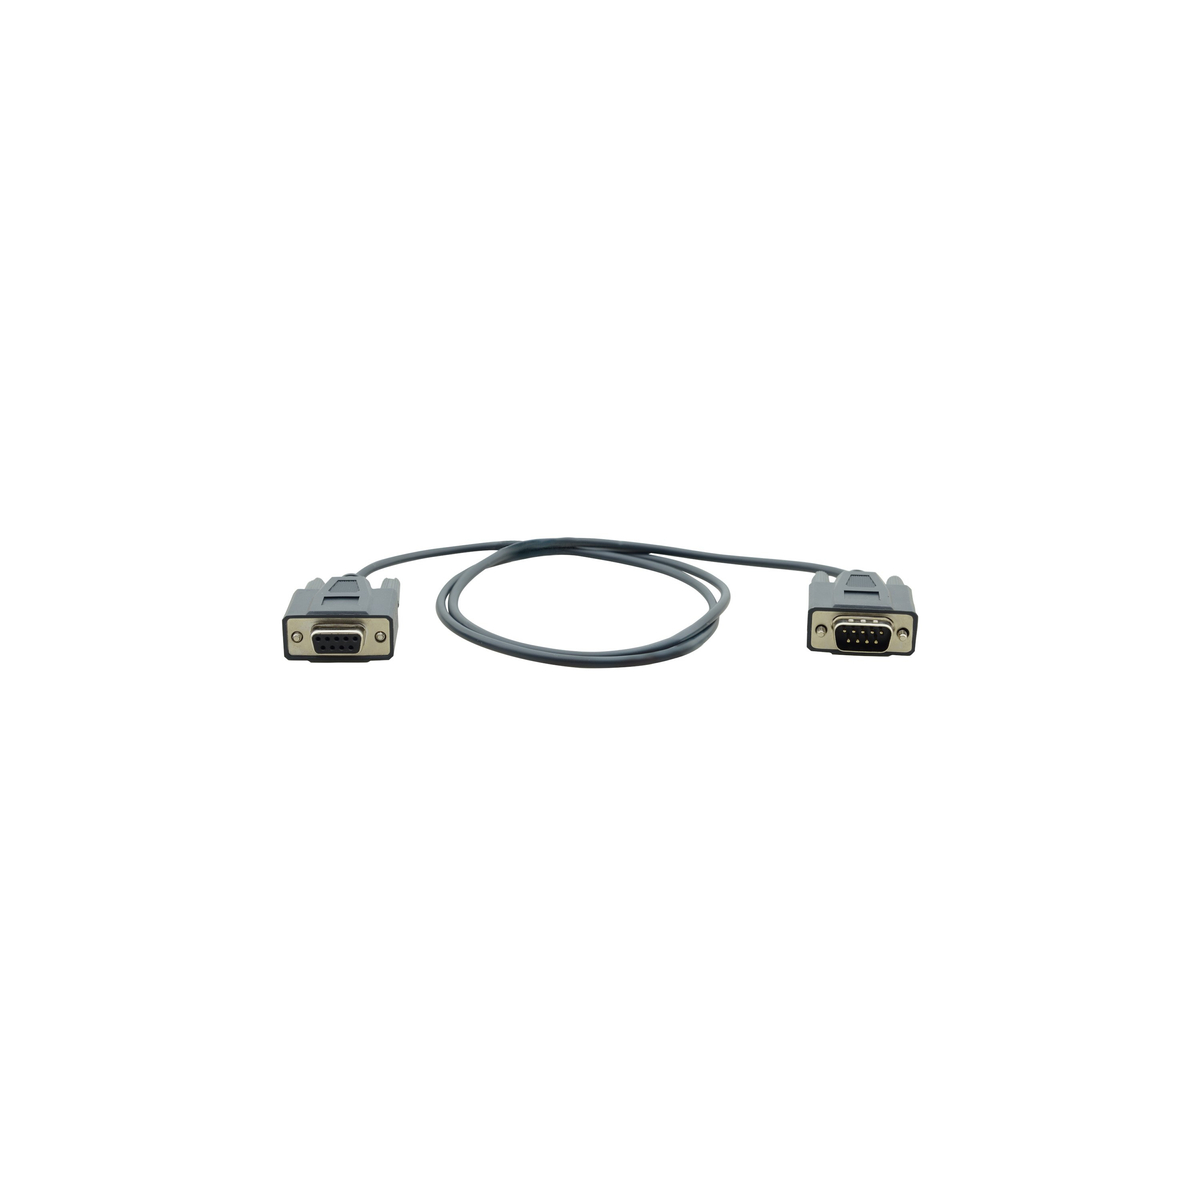 RS-232  D9(M) to D9(F) cable